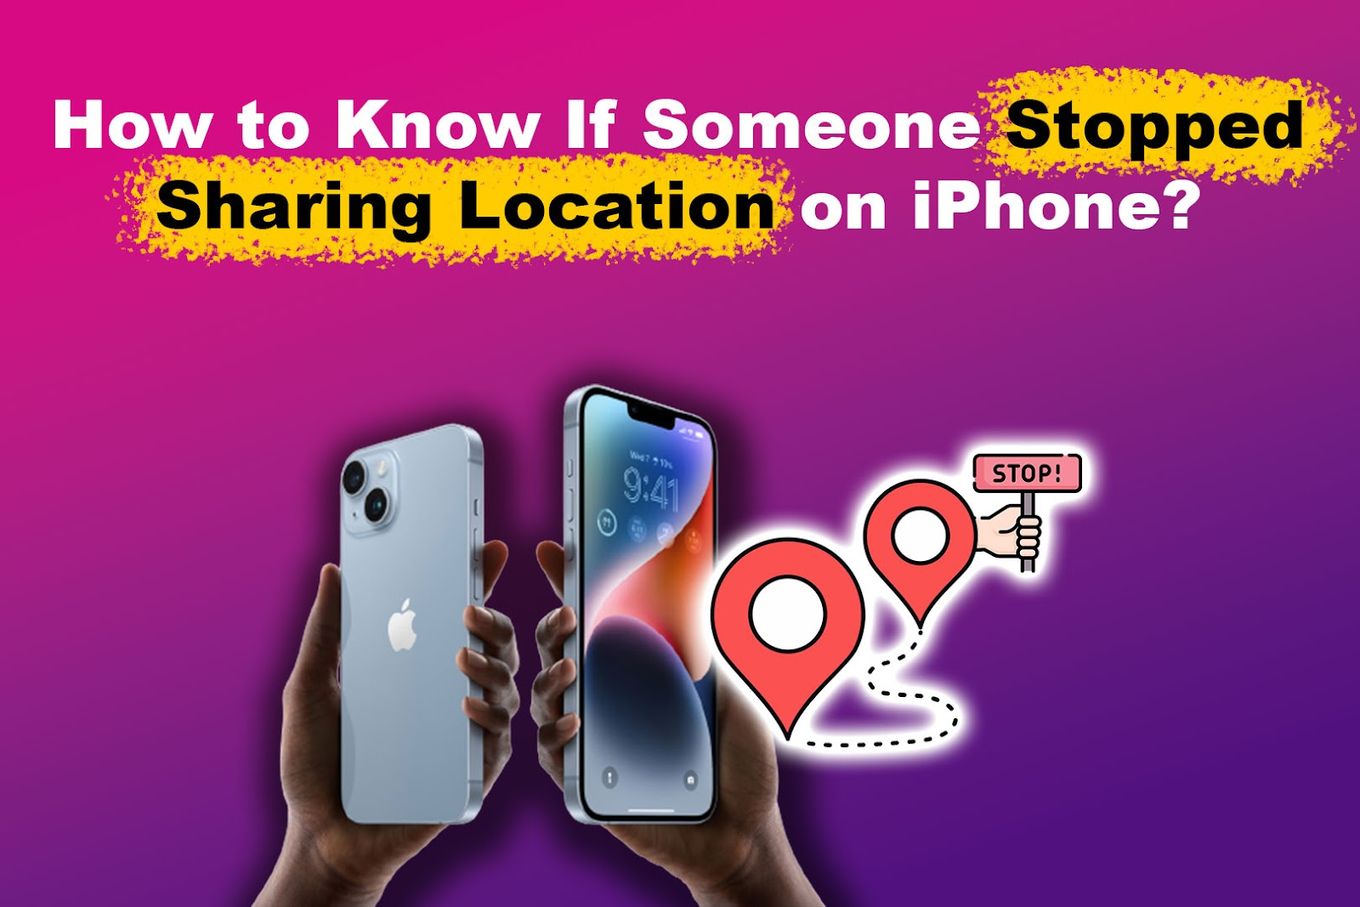 How to Know If Someone Stopped Sharing Location on iPhone